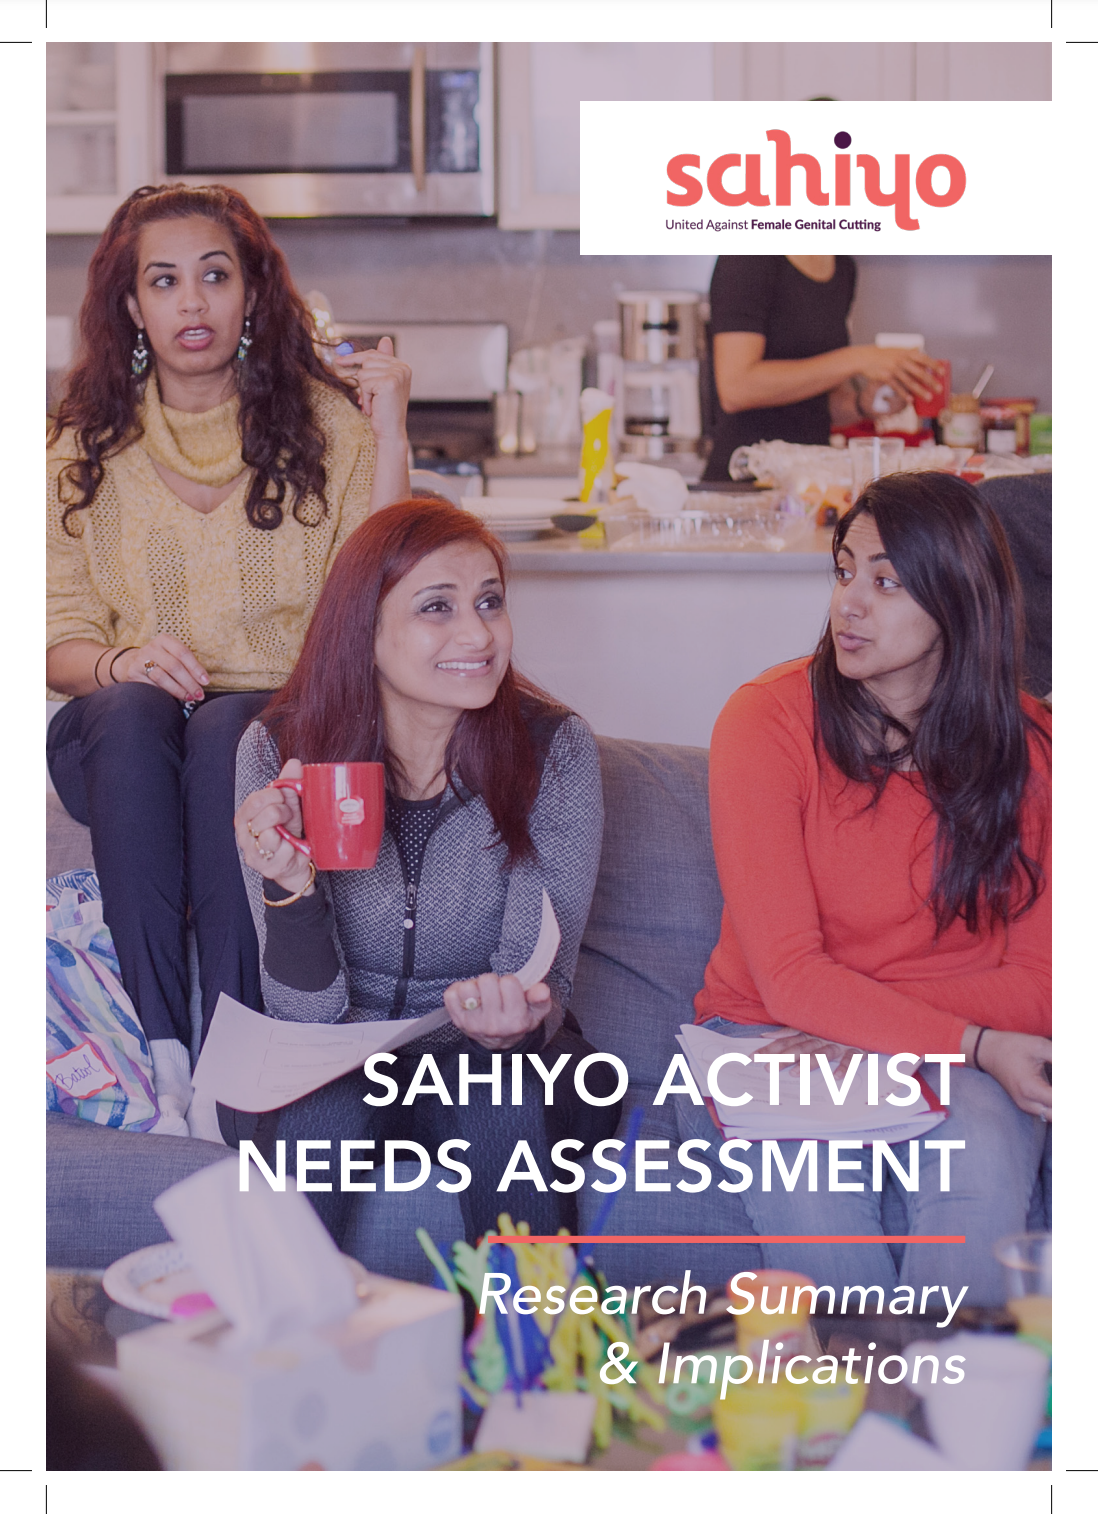 This image for Sahiyo Activist Needs Assessment Study